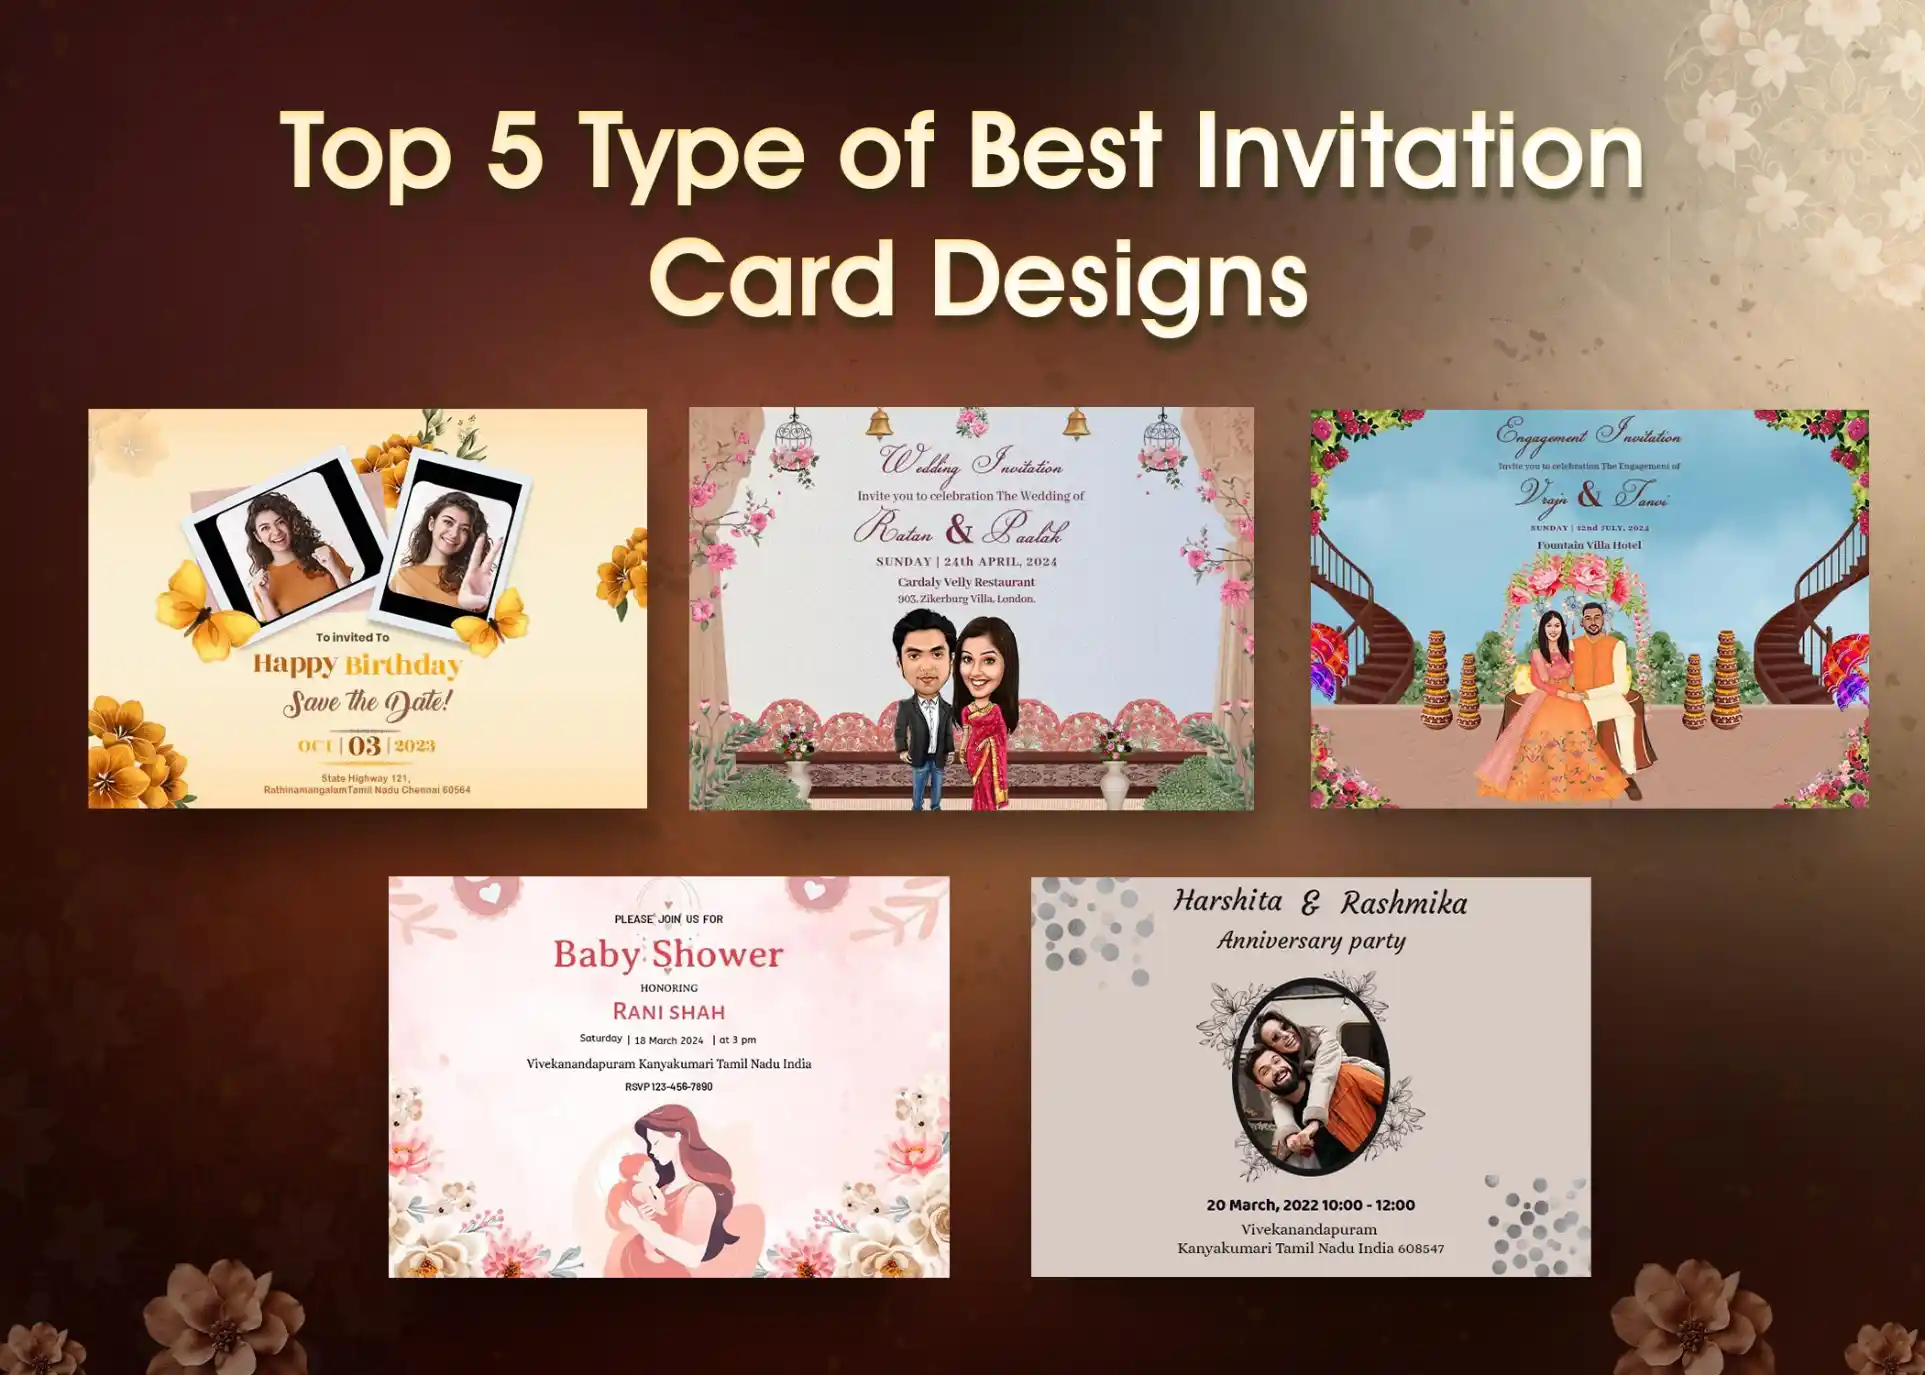 Top 5 Type of Best Invitation Card Designs